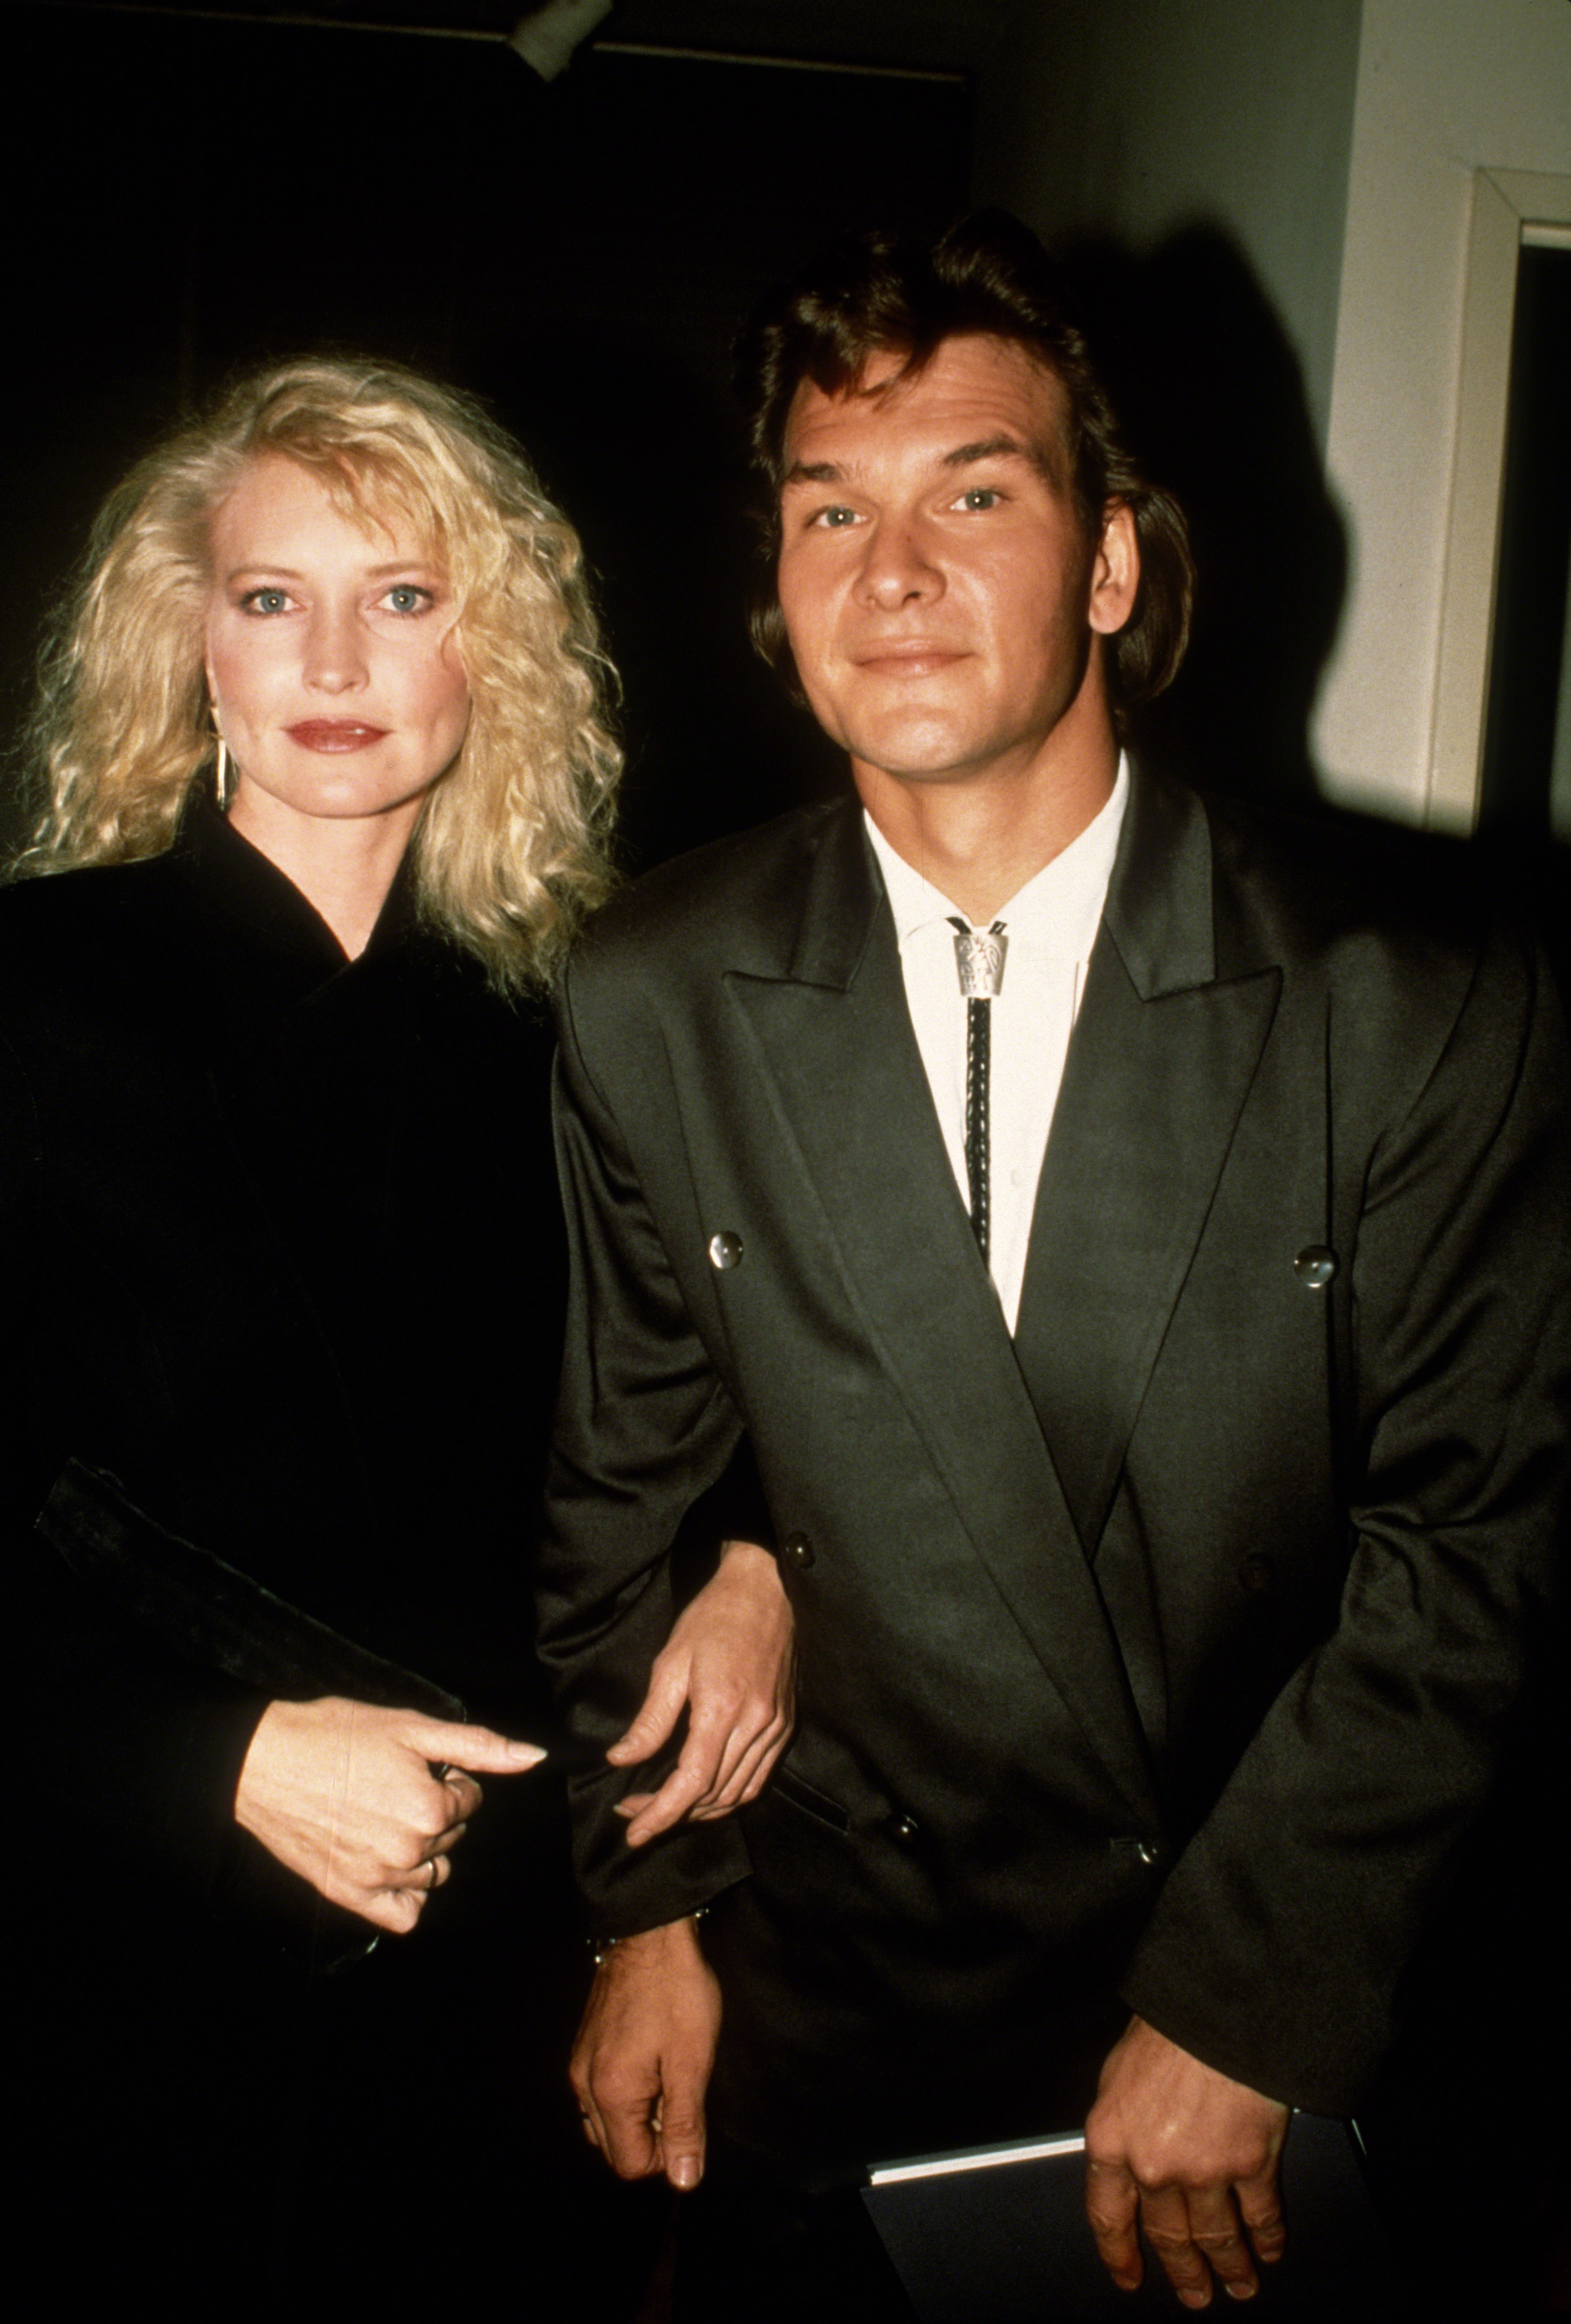 Patrick Swayze and Lisa Niemi on January 1, 1987 in New York City.  | Source: Getty Images